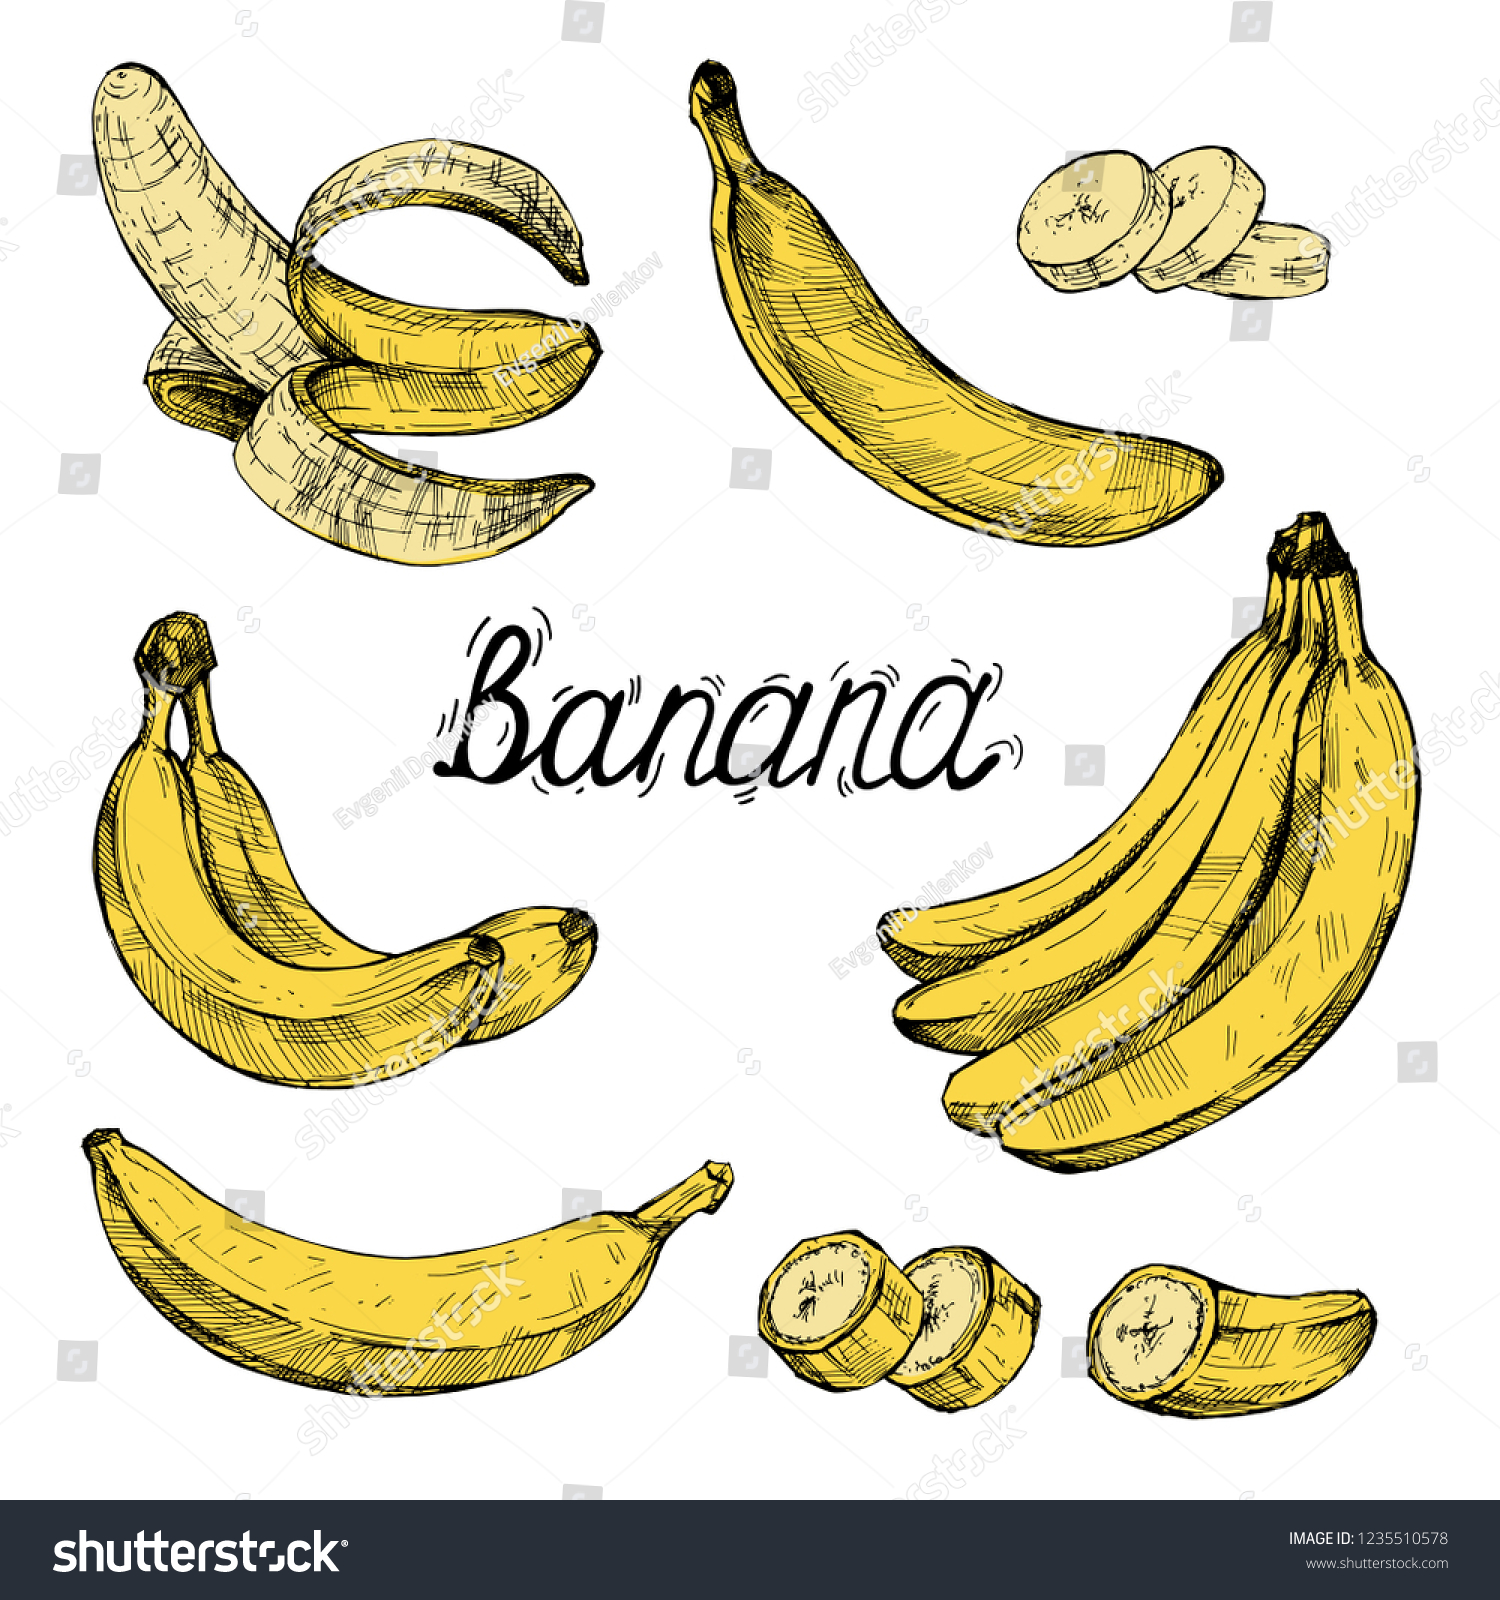 Drawing Image Bananas Different Versions Vector Stock Vector (Royalty ...